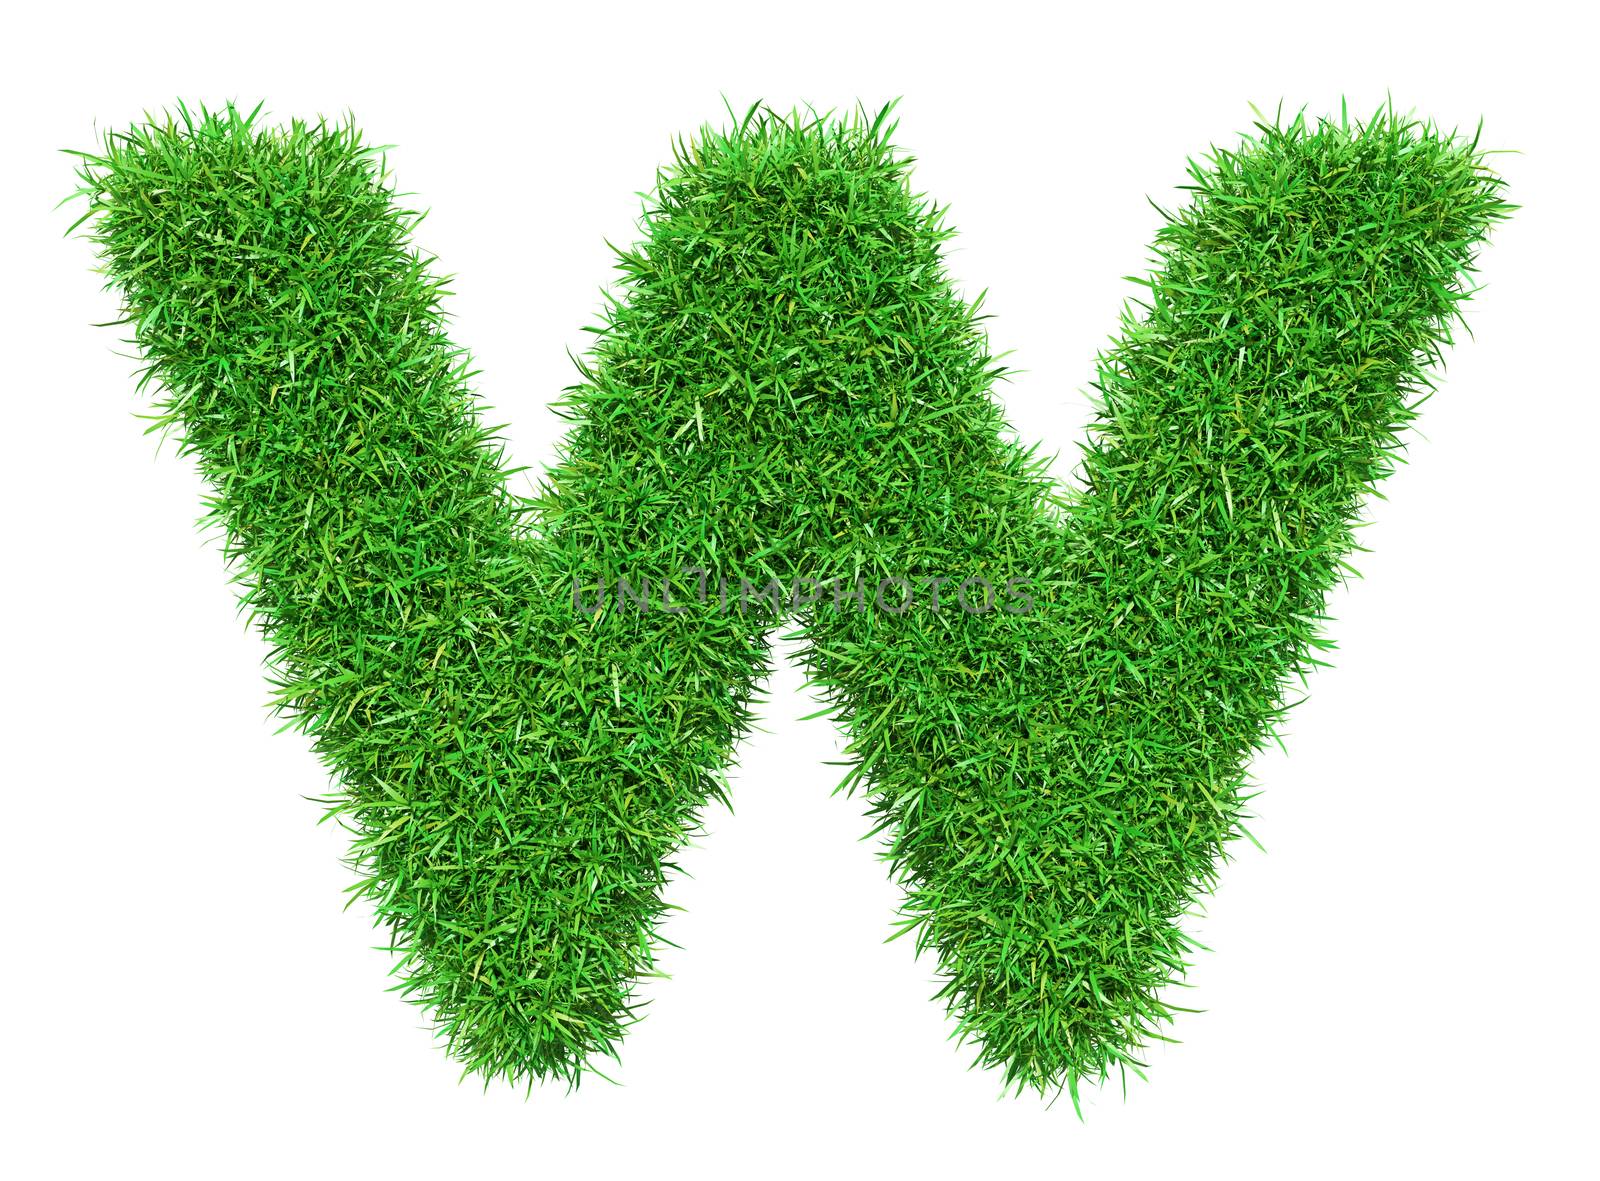 Green Grass Letter W. Isolated On White Background. Font For Your Design. 3D Illustration